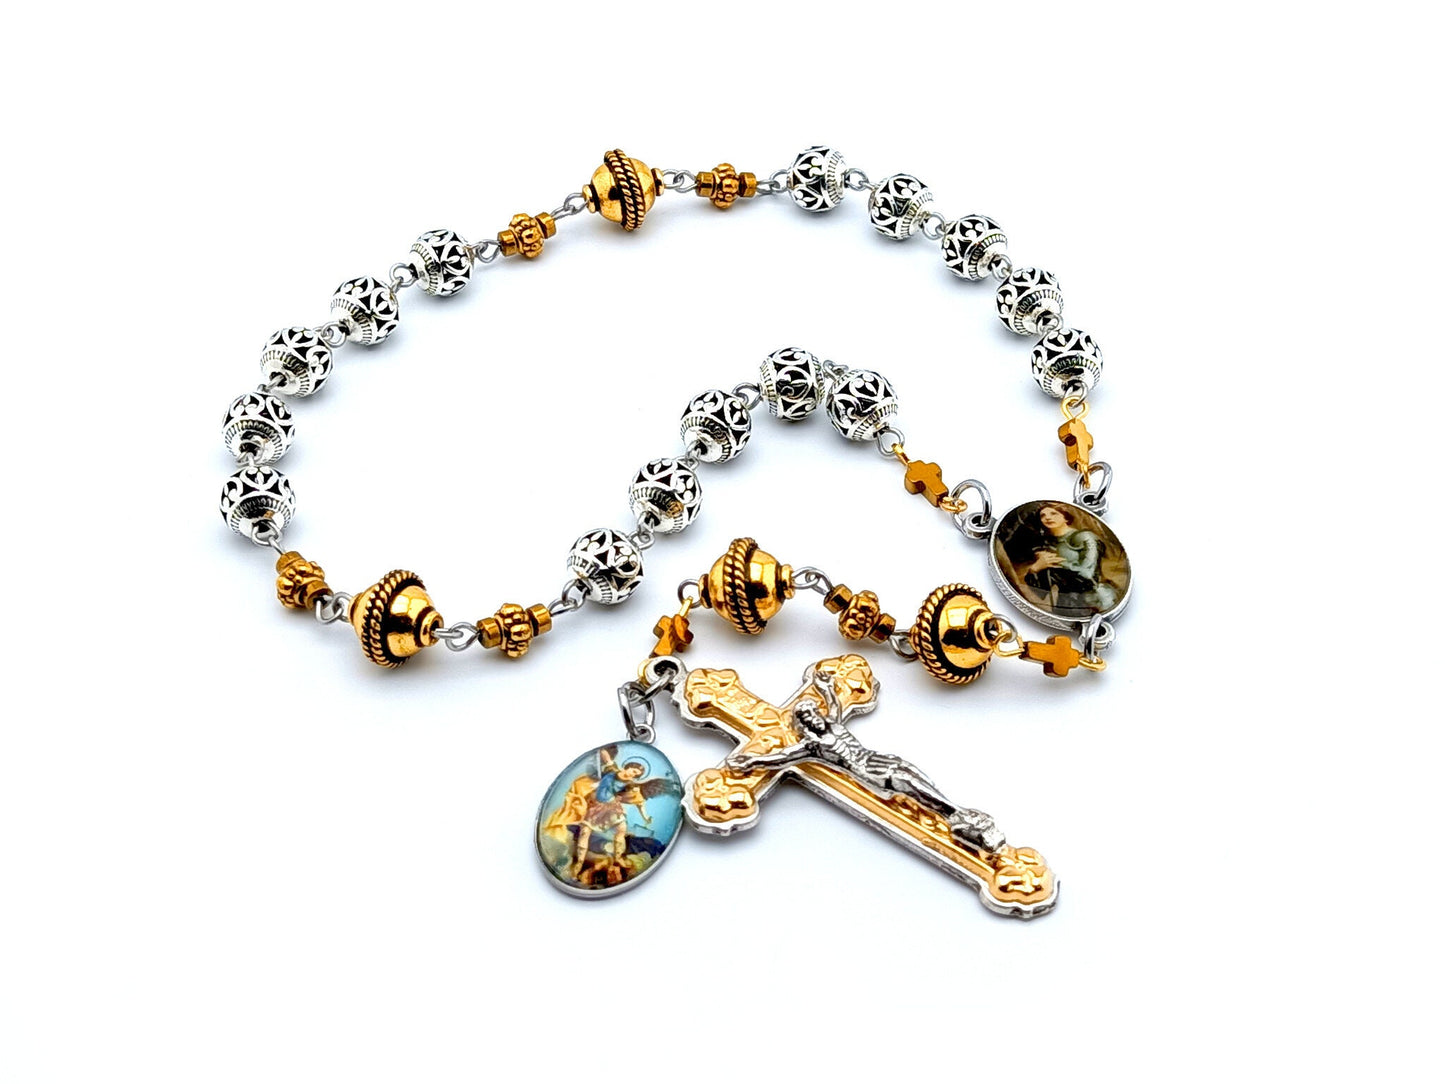 Saint Joan of Arc unique rosary beads prayer chaplet with silver and golden beads, suilver and gold crucifixand picture medals.